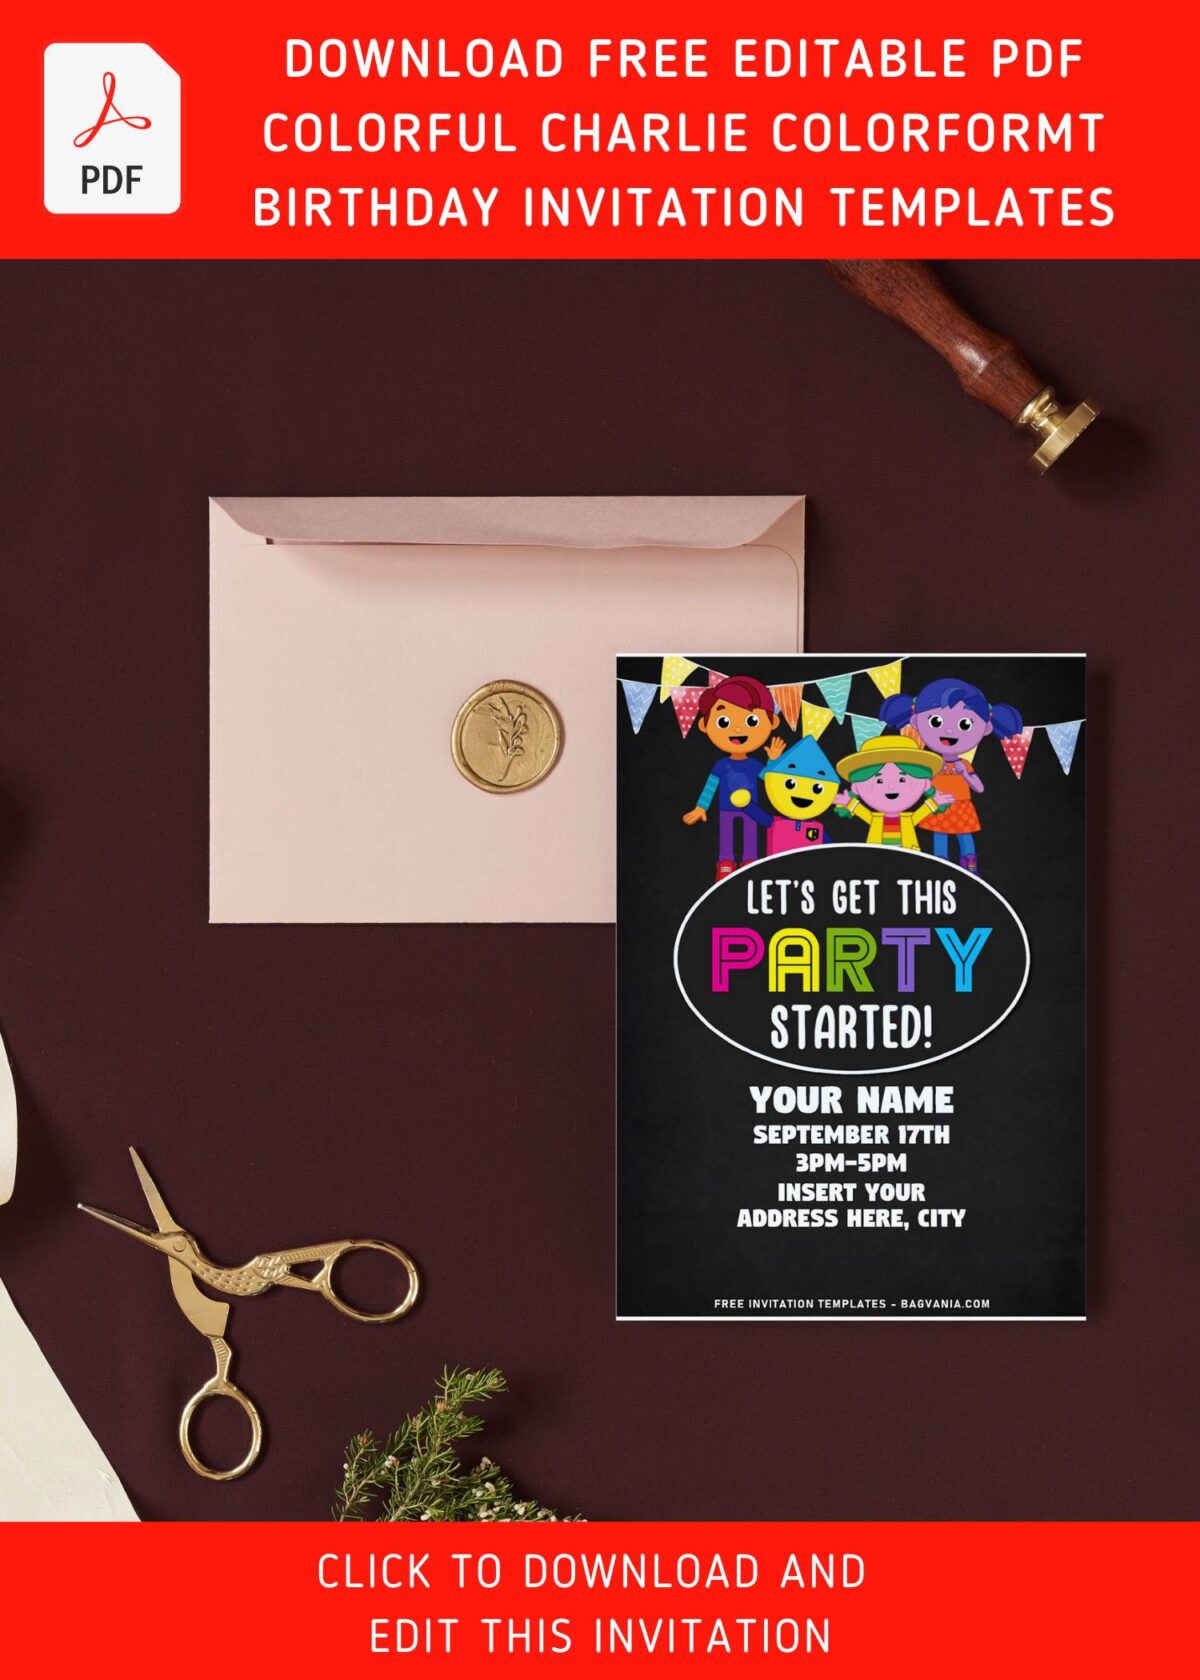 (Free Editable PDF) Chalkboard Charlie's Colorform City Birthday Invitation Templates with Red and Charlie